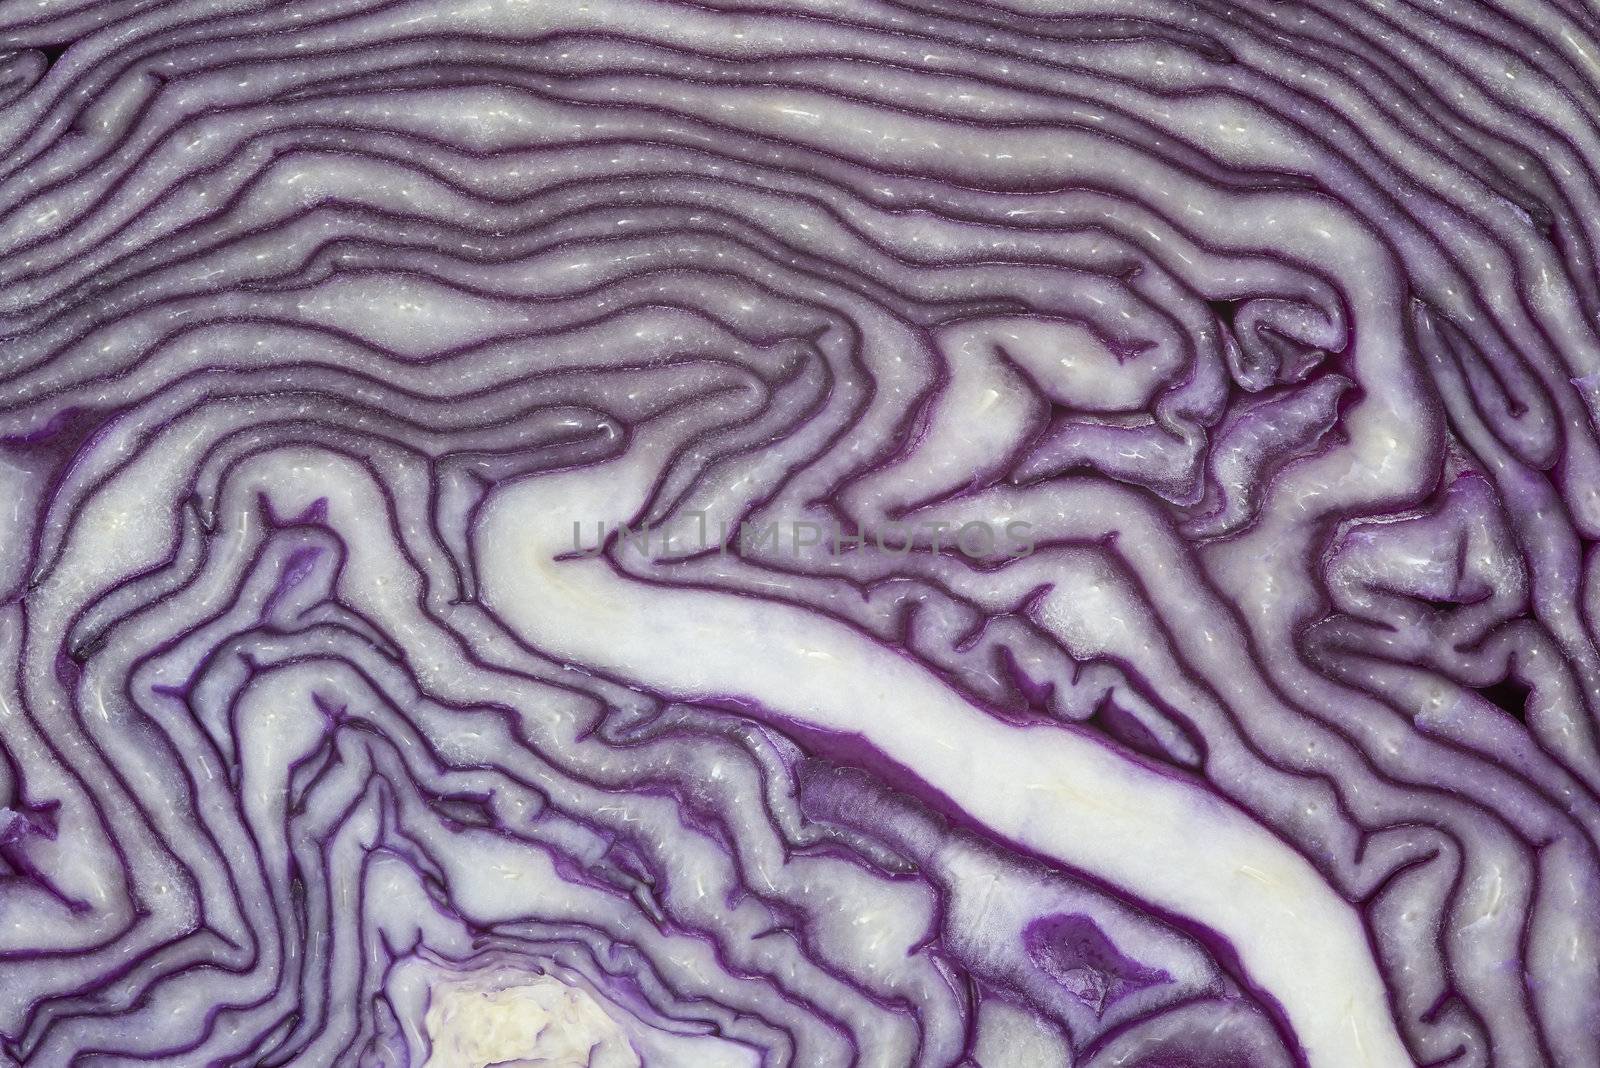 A red cabbage cut showing its texture